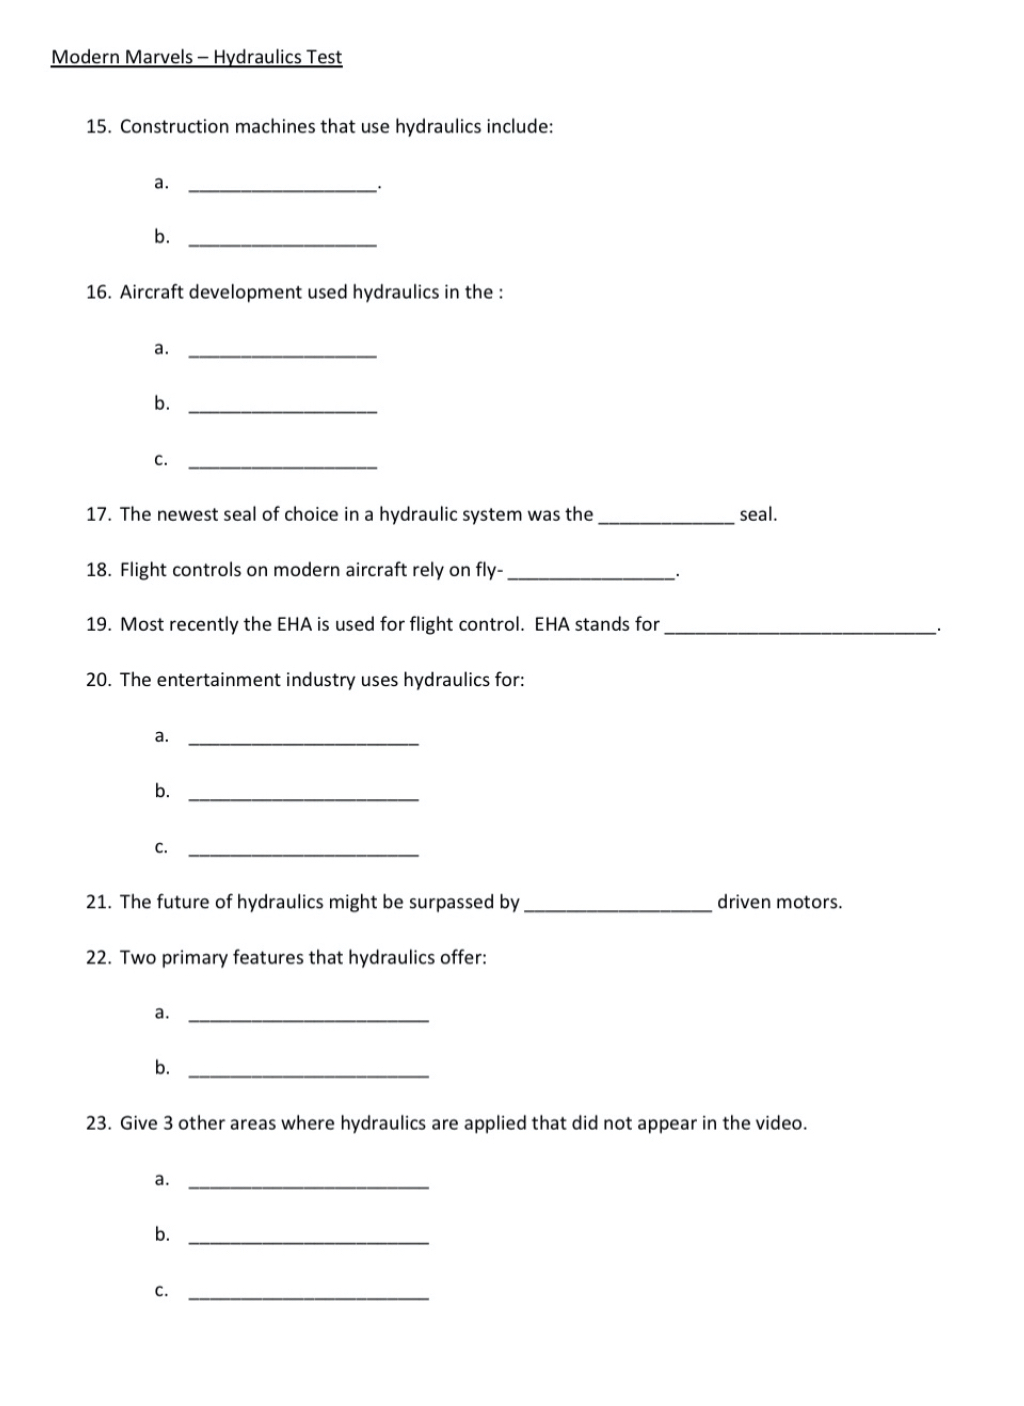 ️Modern Marvels Cotton Worksheet Answers Free Download Goodimg co